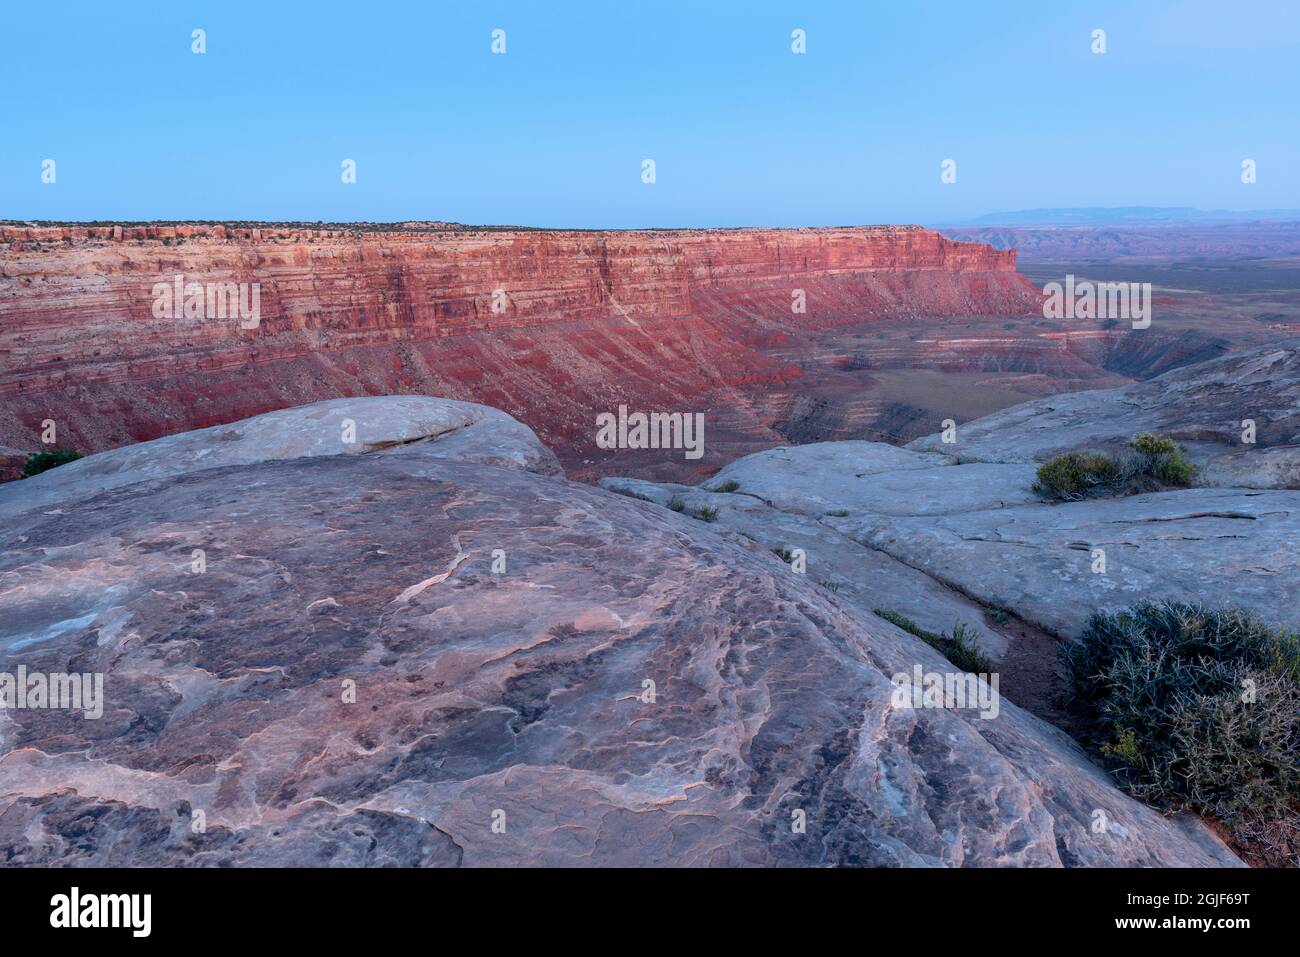 USA, Utah, Glen Canyon National Recreation Area, Cedar mesa sandstone at Muley Point and view east at dusk with nearby butte and distant Raplee Ridge. Stock Photo